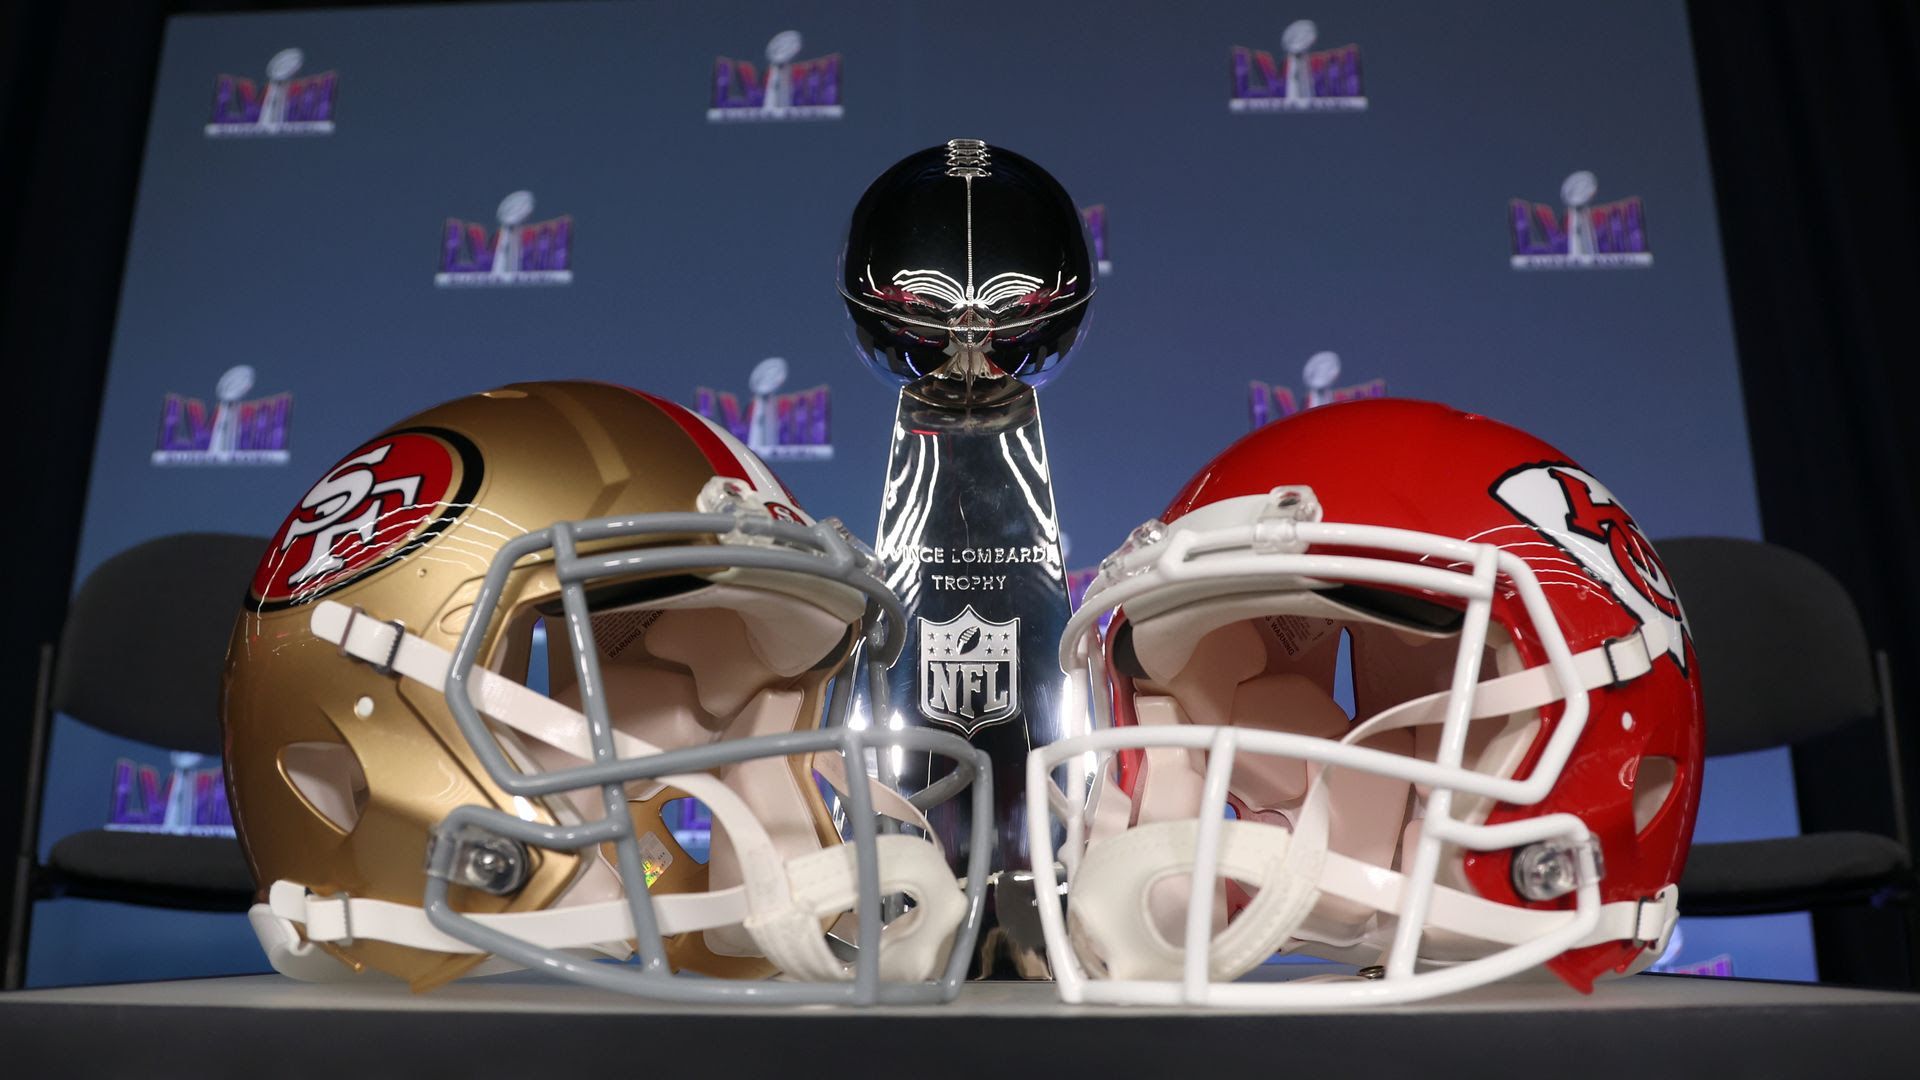 The helmets of the San Francisco 49ers and the Kansas City Chiefs in front of the Lombardi Trophy.